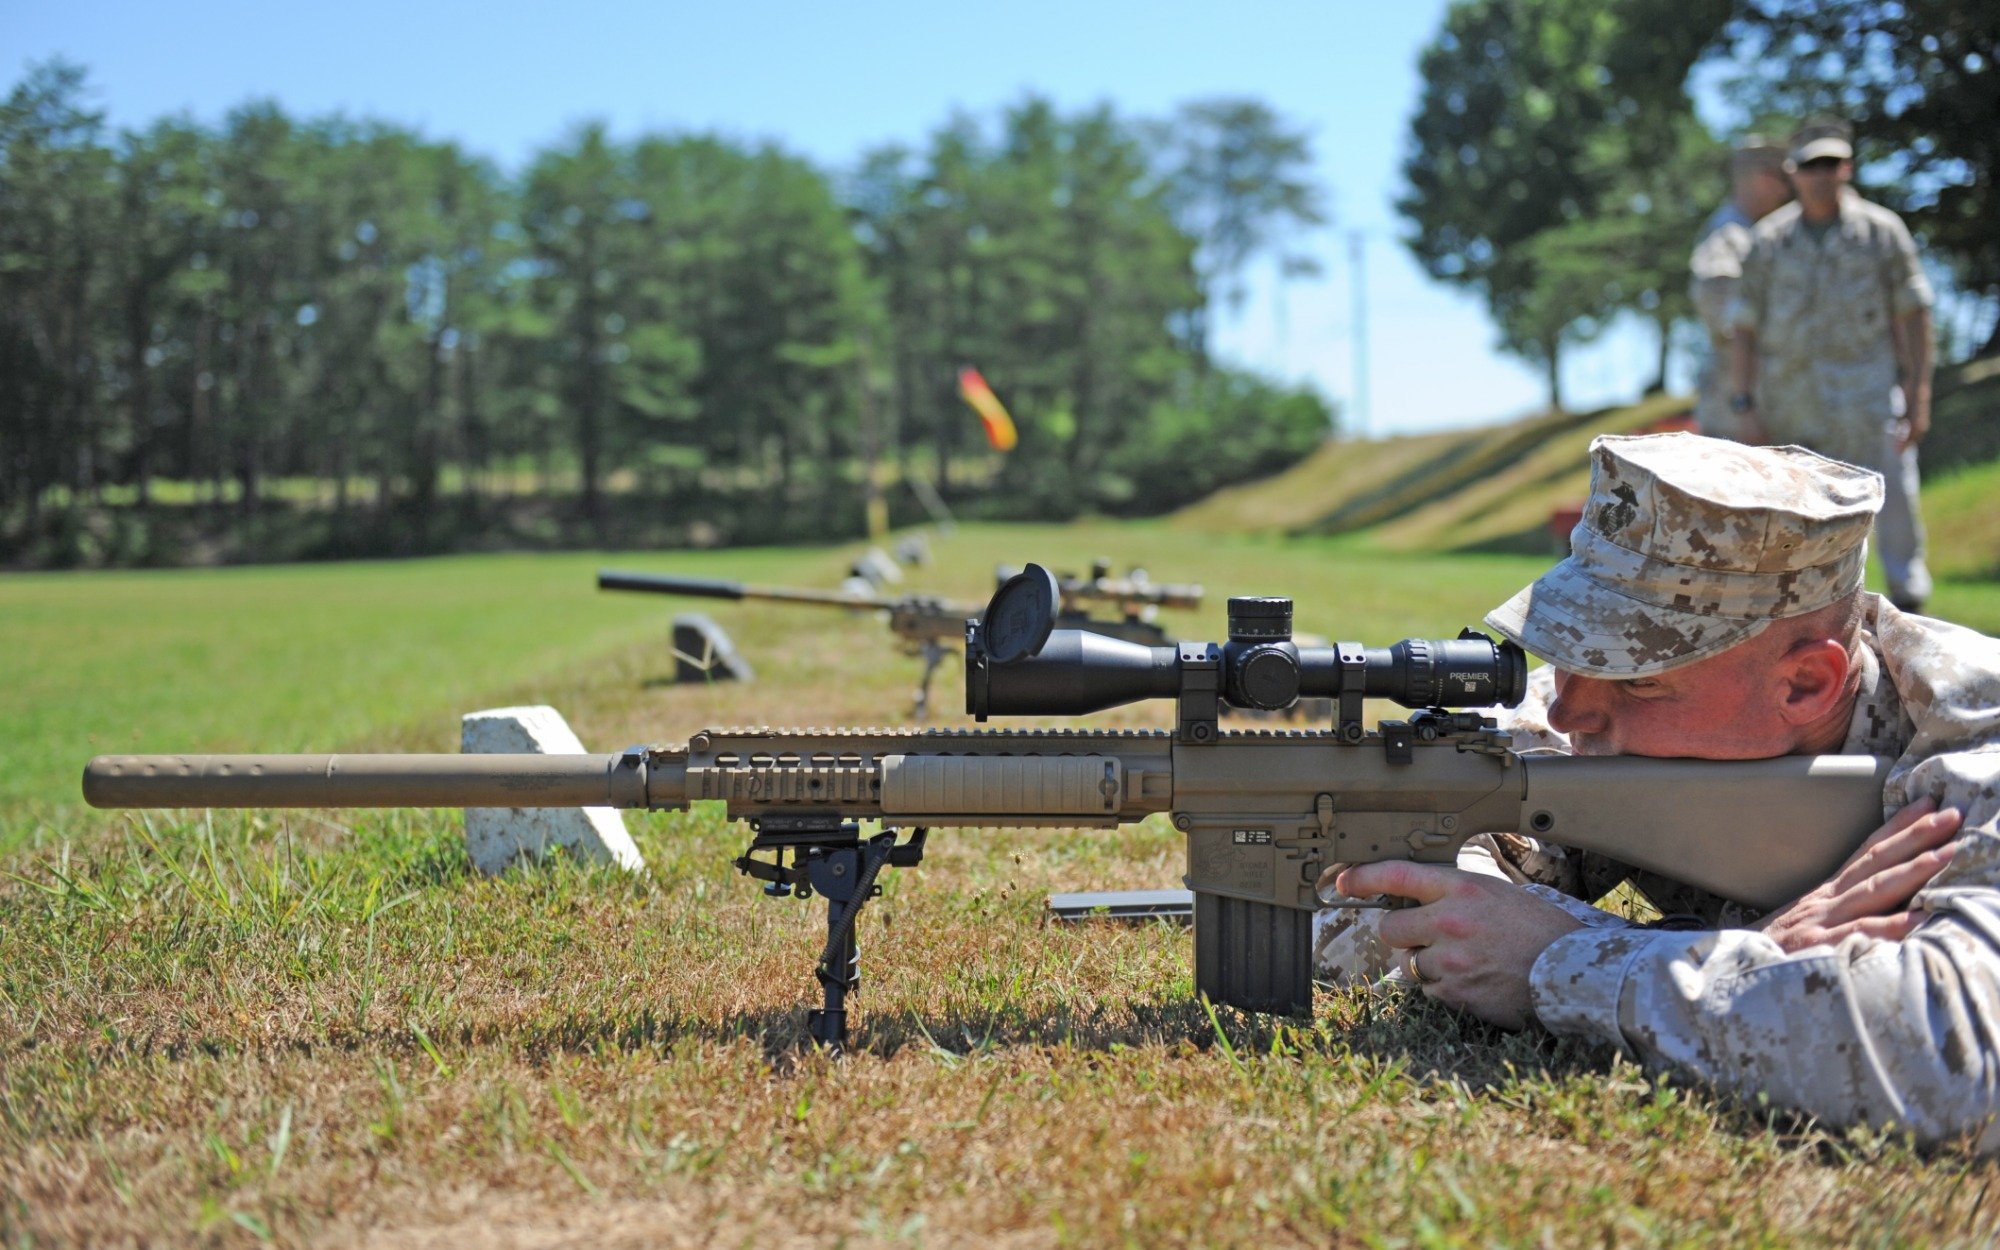 ba-bang-just-how-good-is-u-s-special-forces-m110k1-rifle